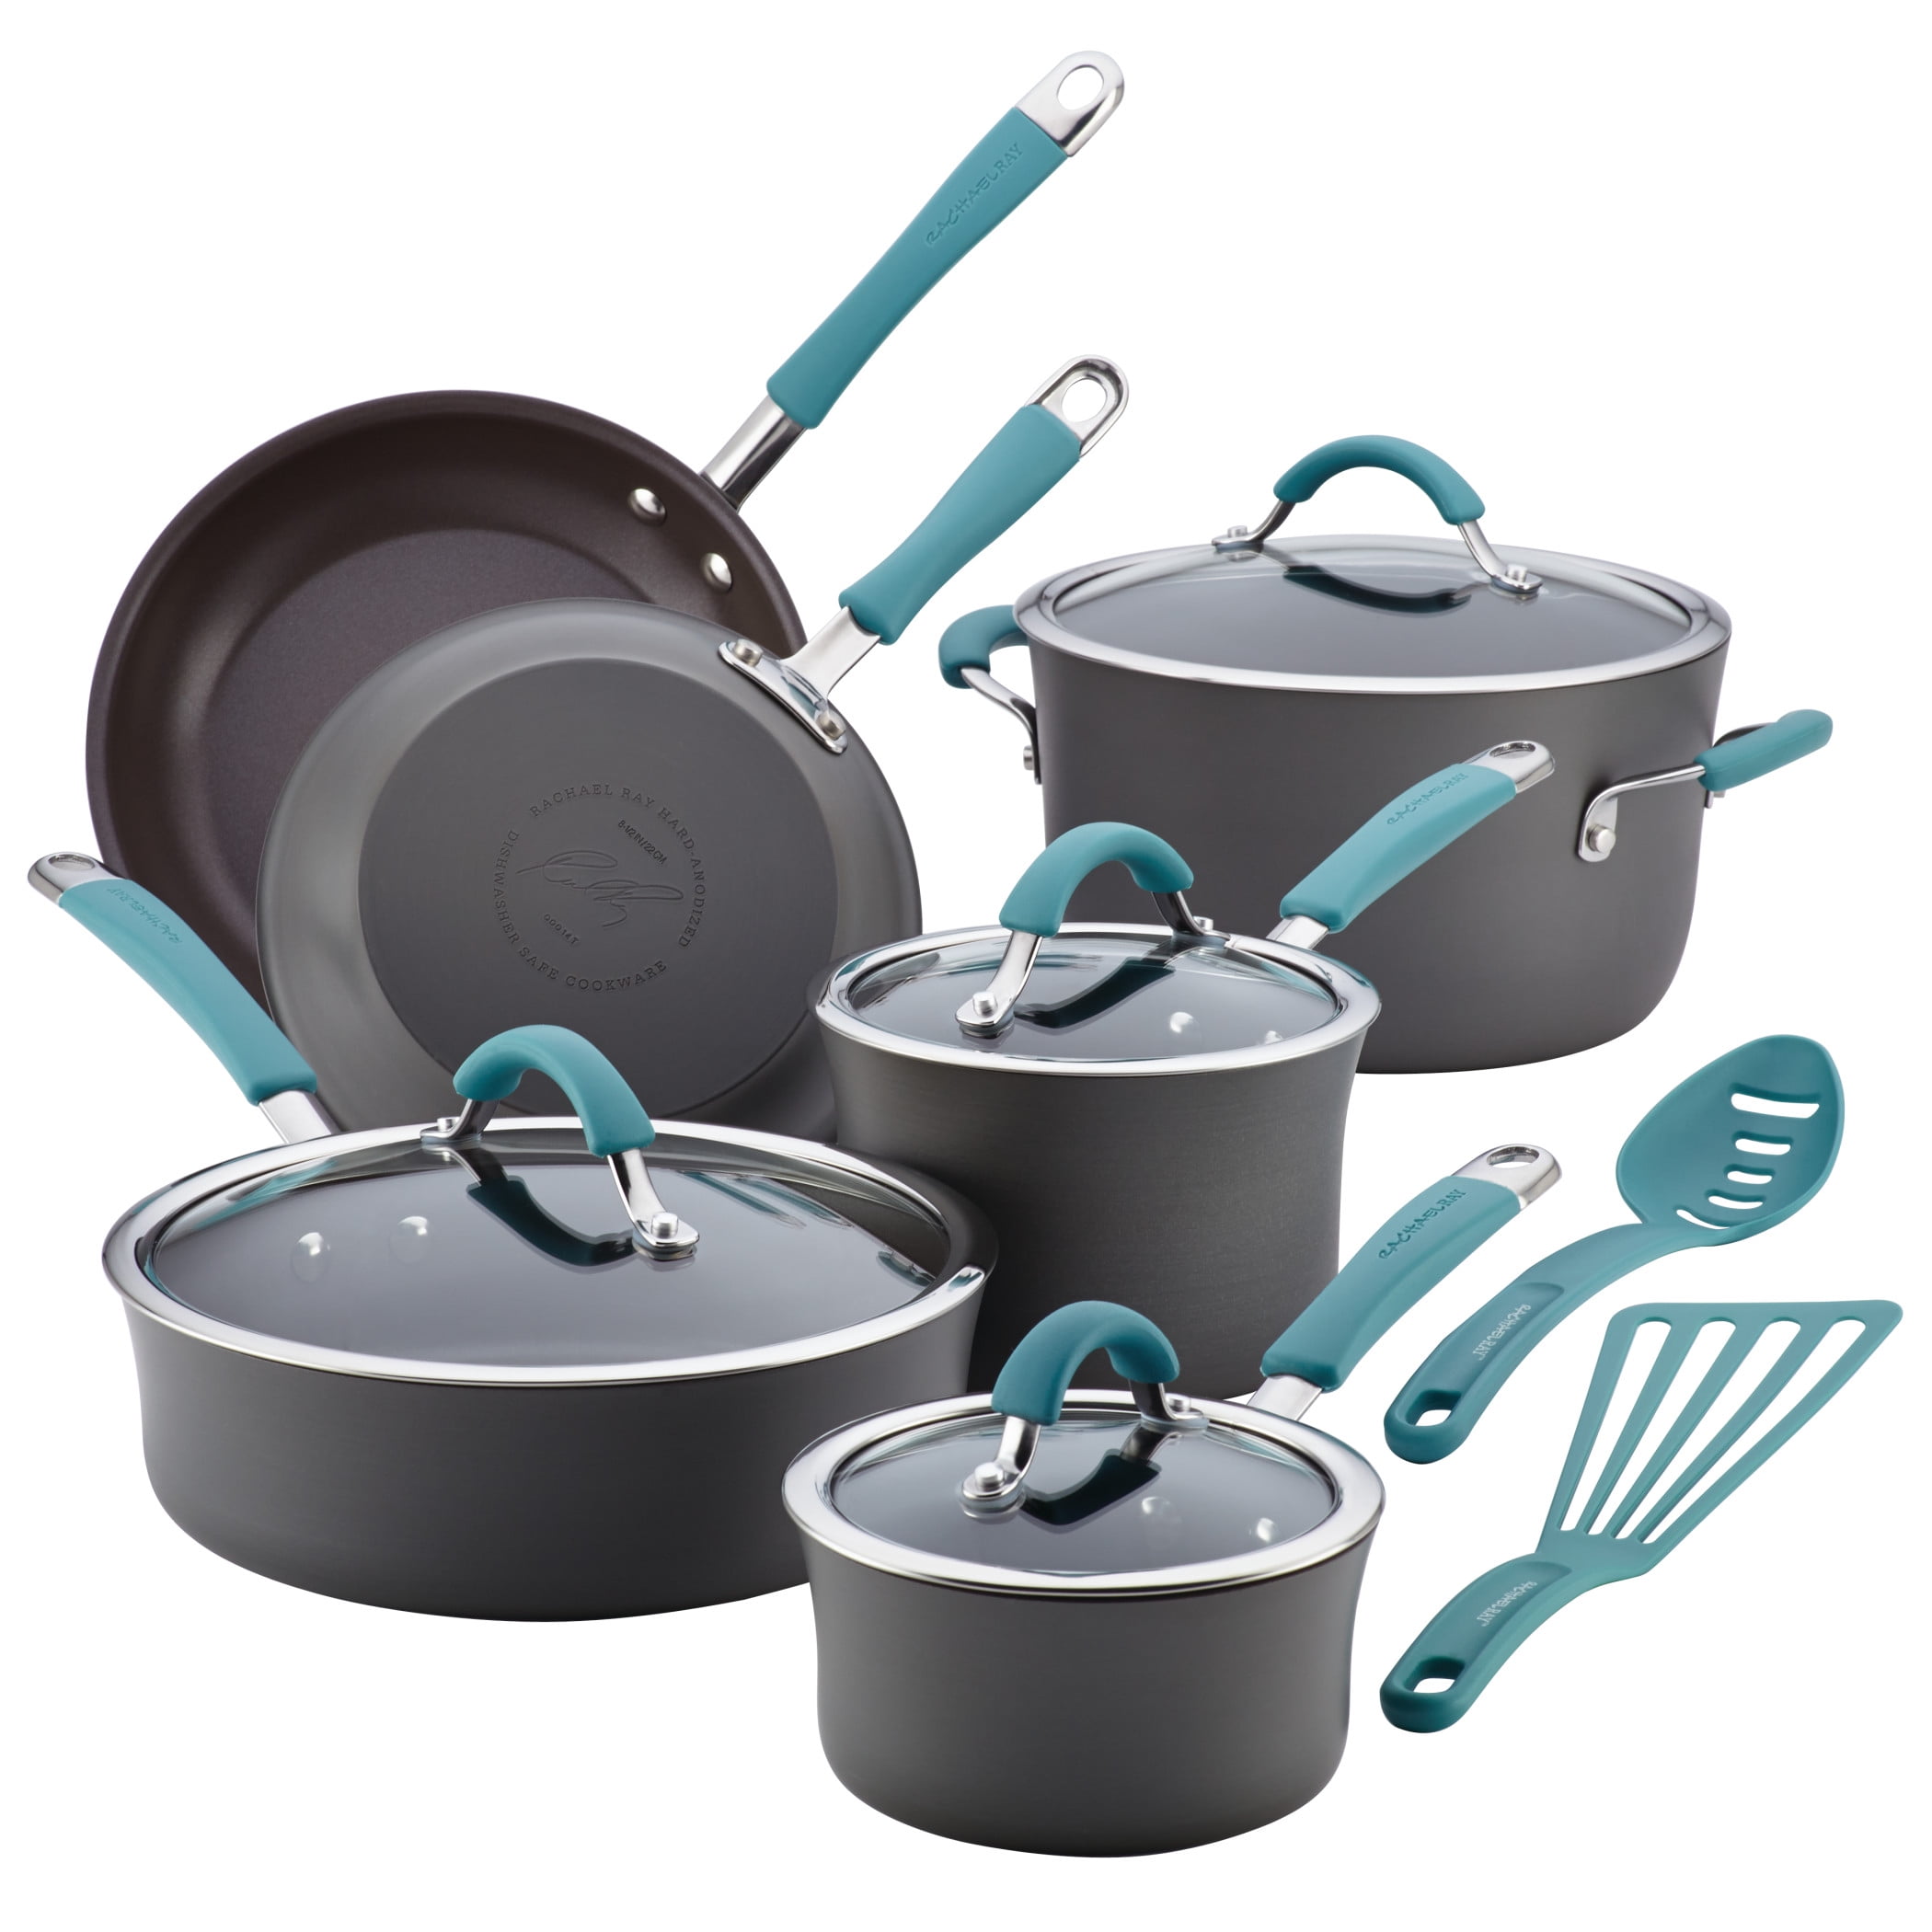 Rachael Ray 16344 Cucina Enamel Nonstick Cookware 12 Count for sale online Agave Blue 